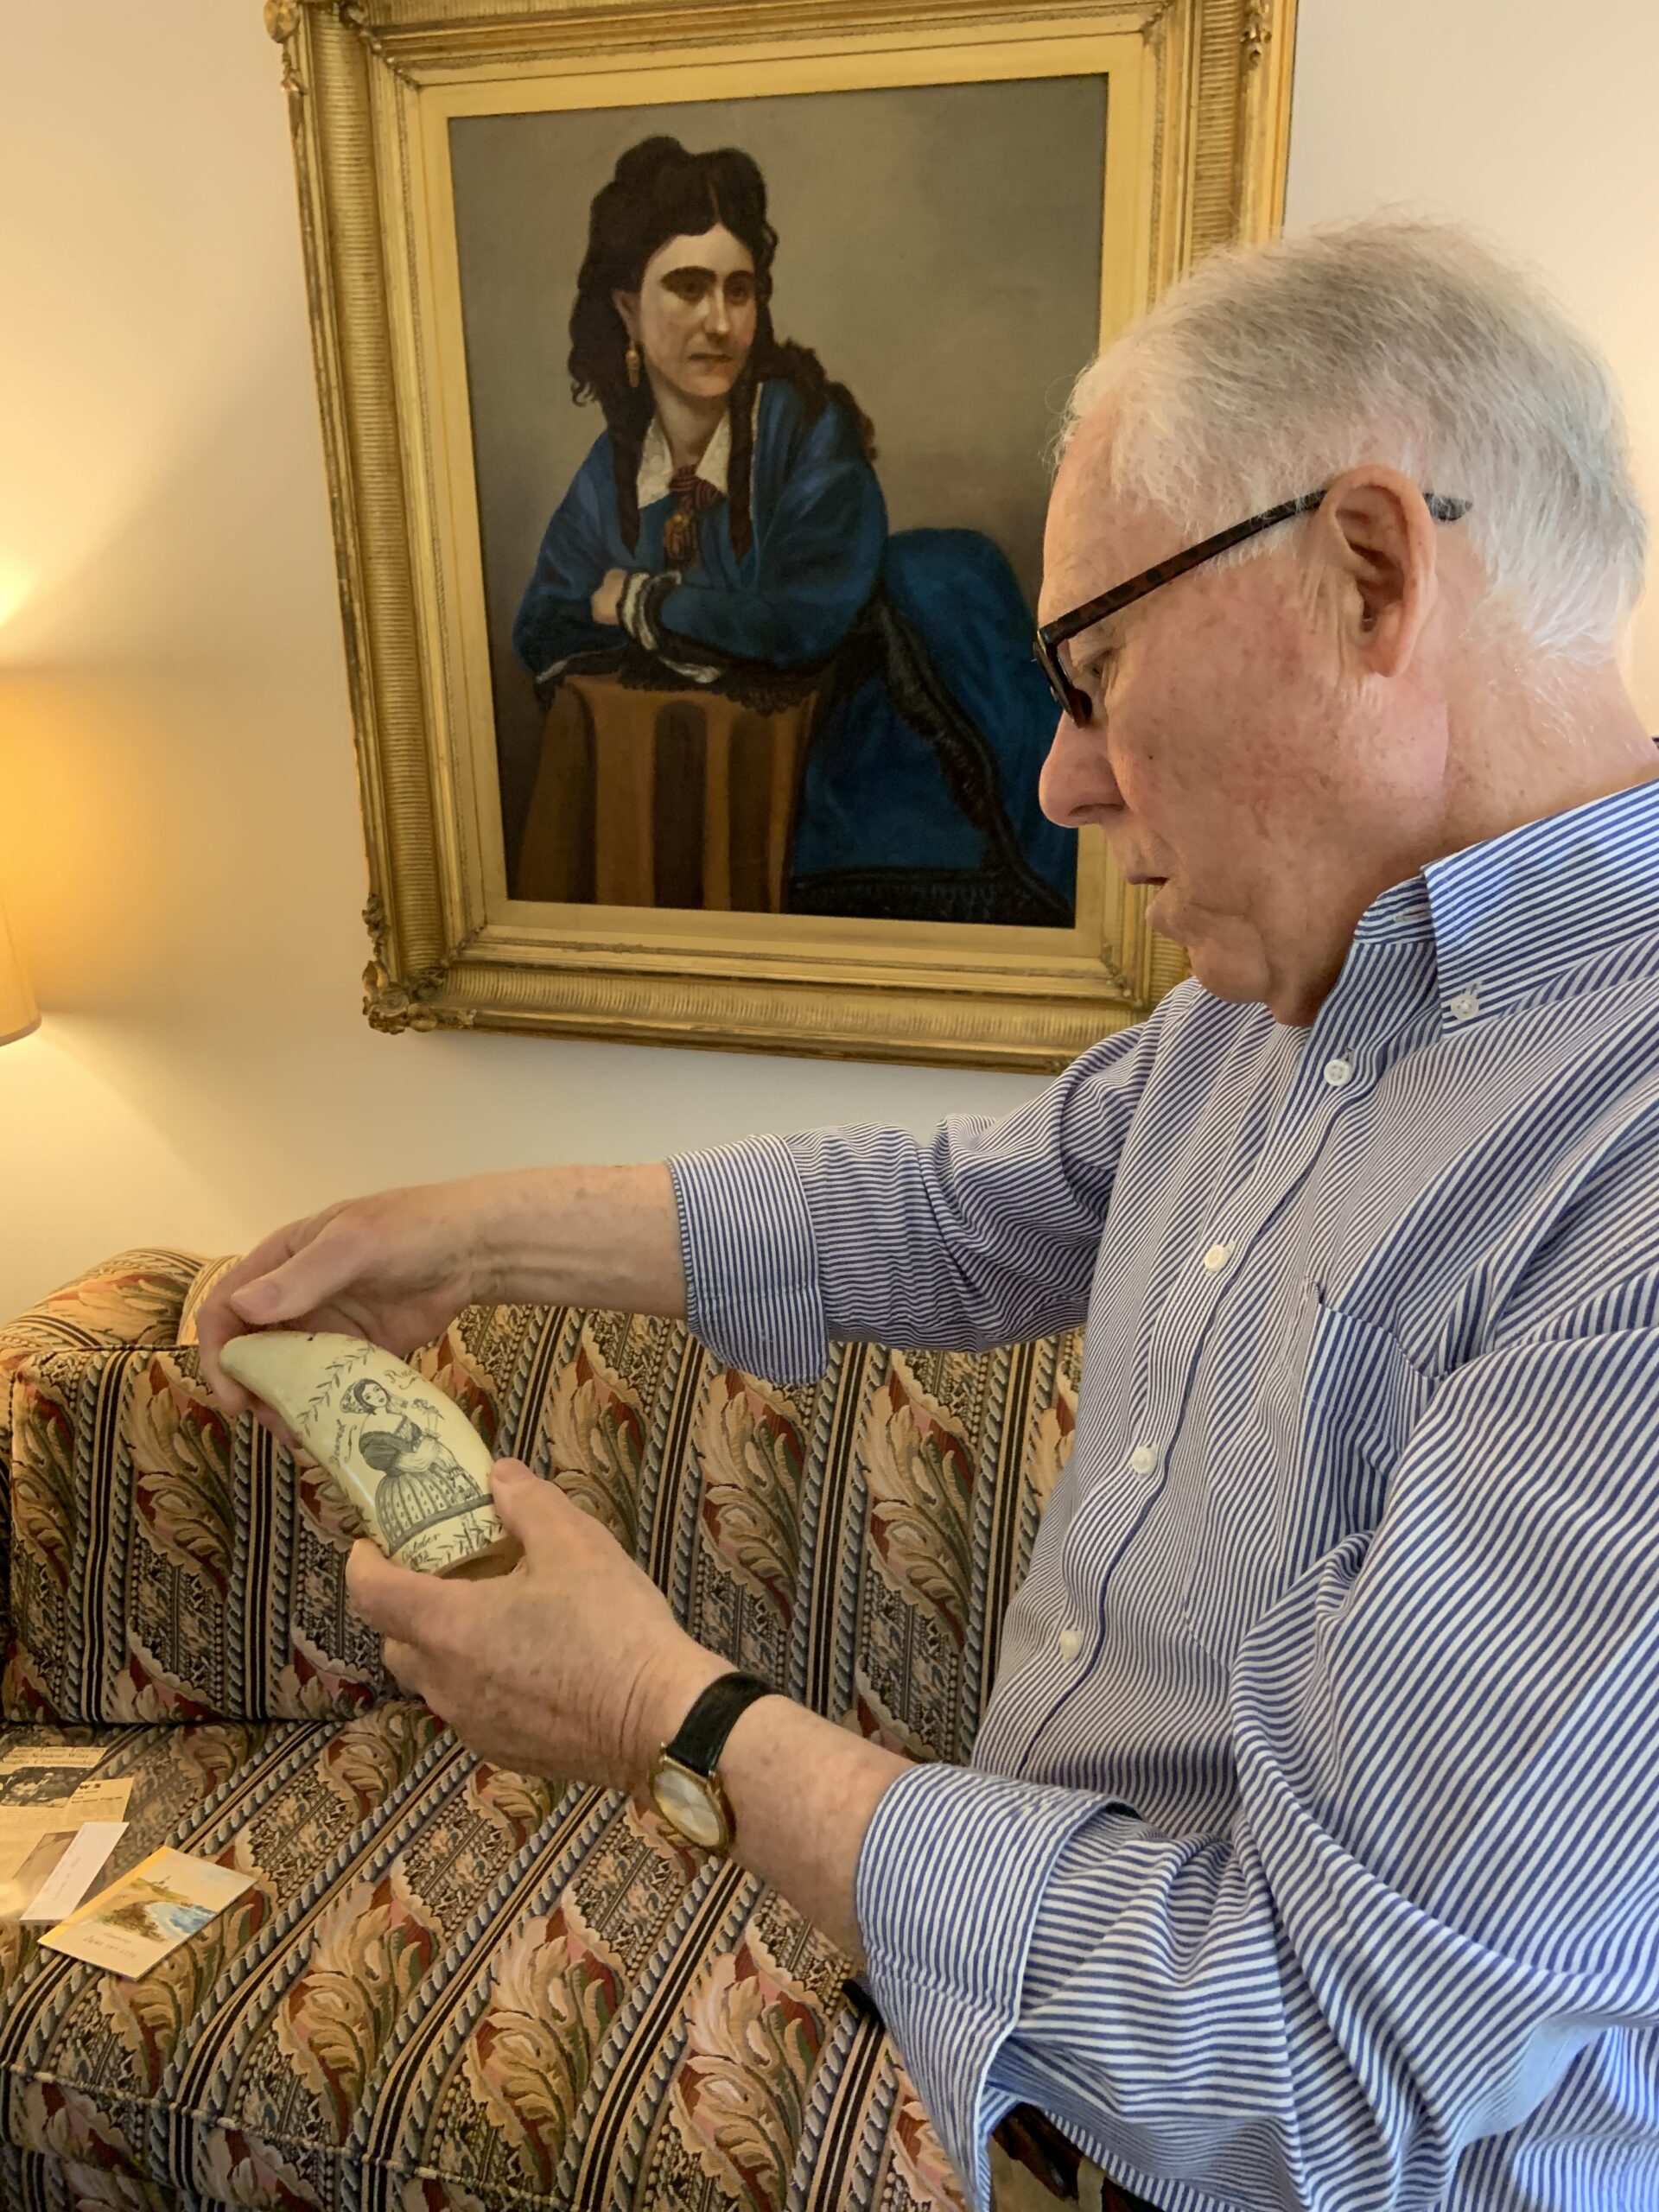 Jack Youngs examines a replica piece of scrimshaw at his home on Harbor Watch Court. STEPHEN J. KOTZ